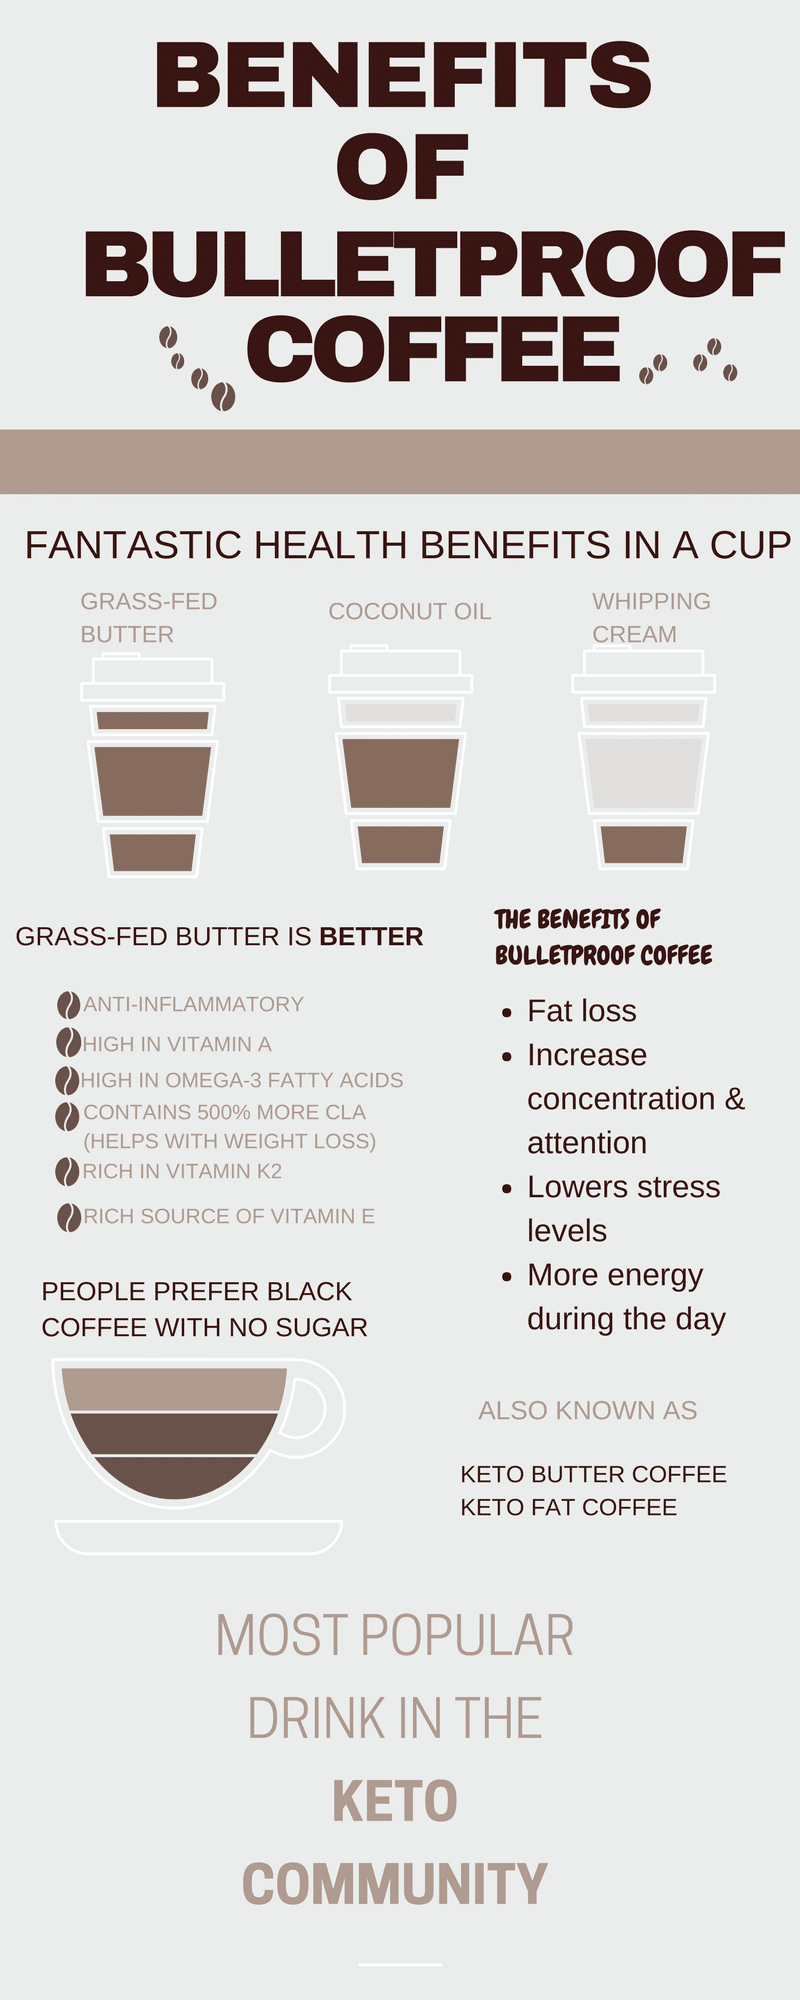 Benefits of the bulletproof coffee infographic